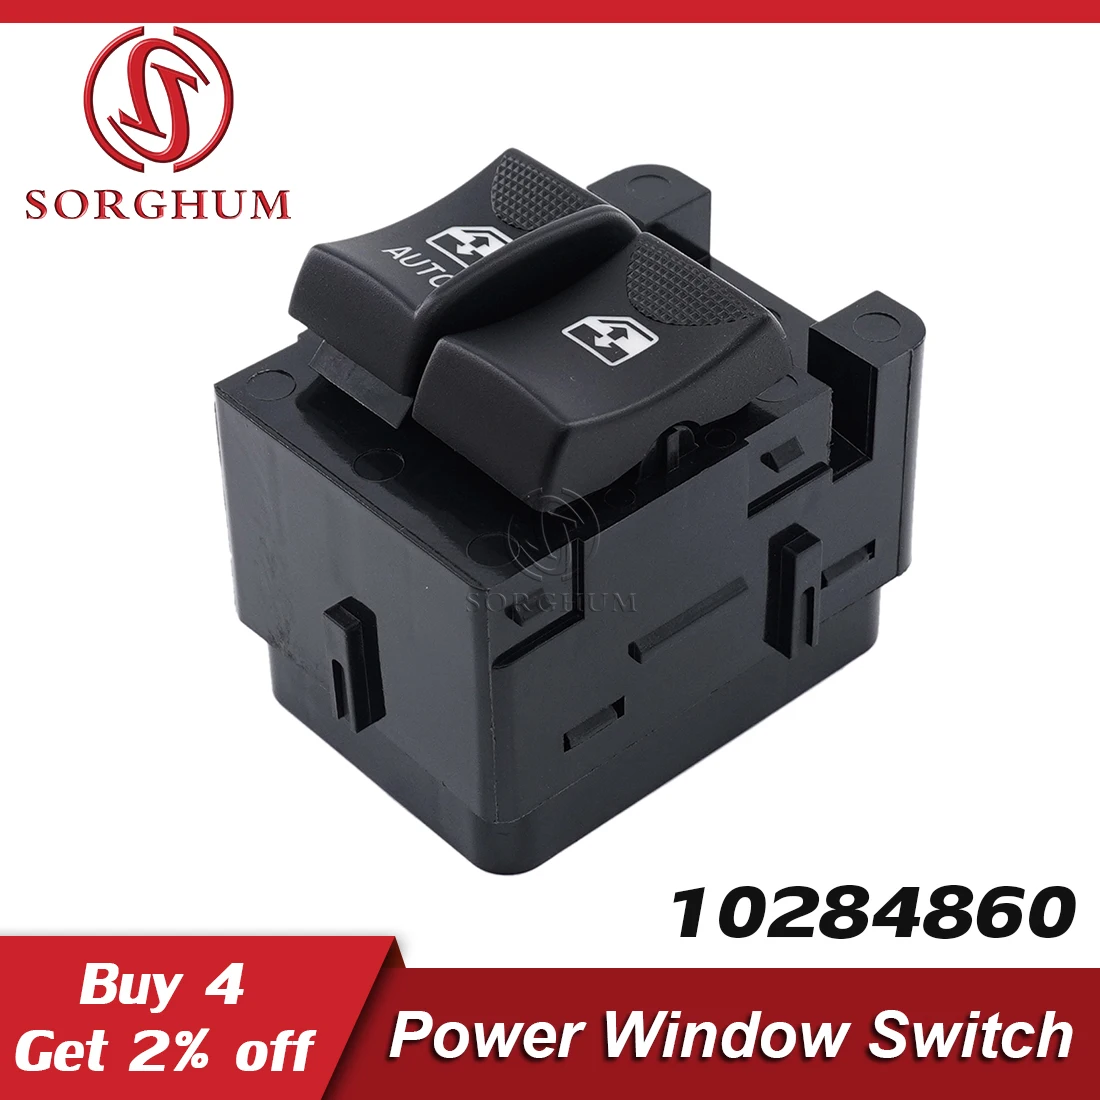 

Sorghum 10284860 25725880 Car Electric Power Master Window Switch For Chevrolet Monte Carlo Express 2003 2004 2005 2007 901-031